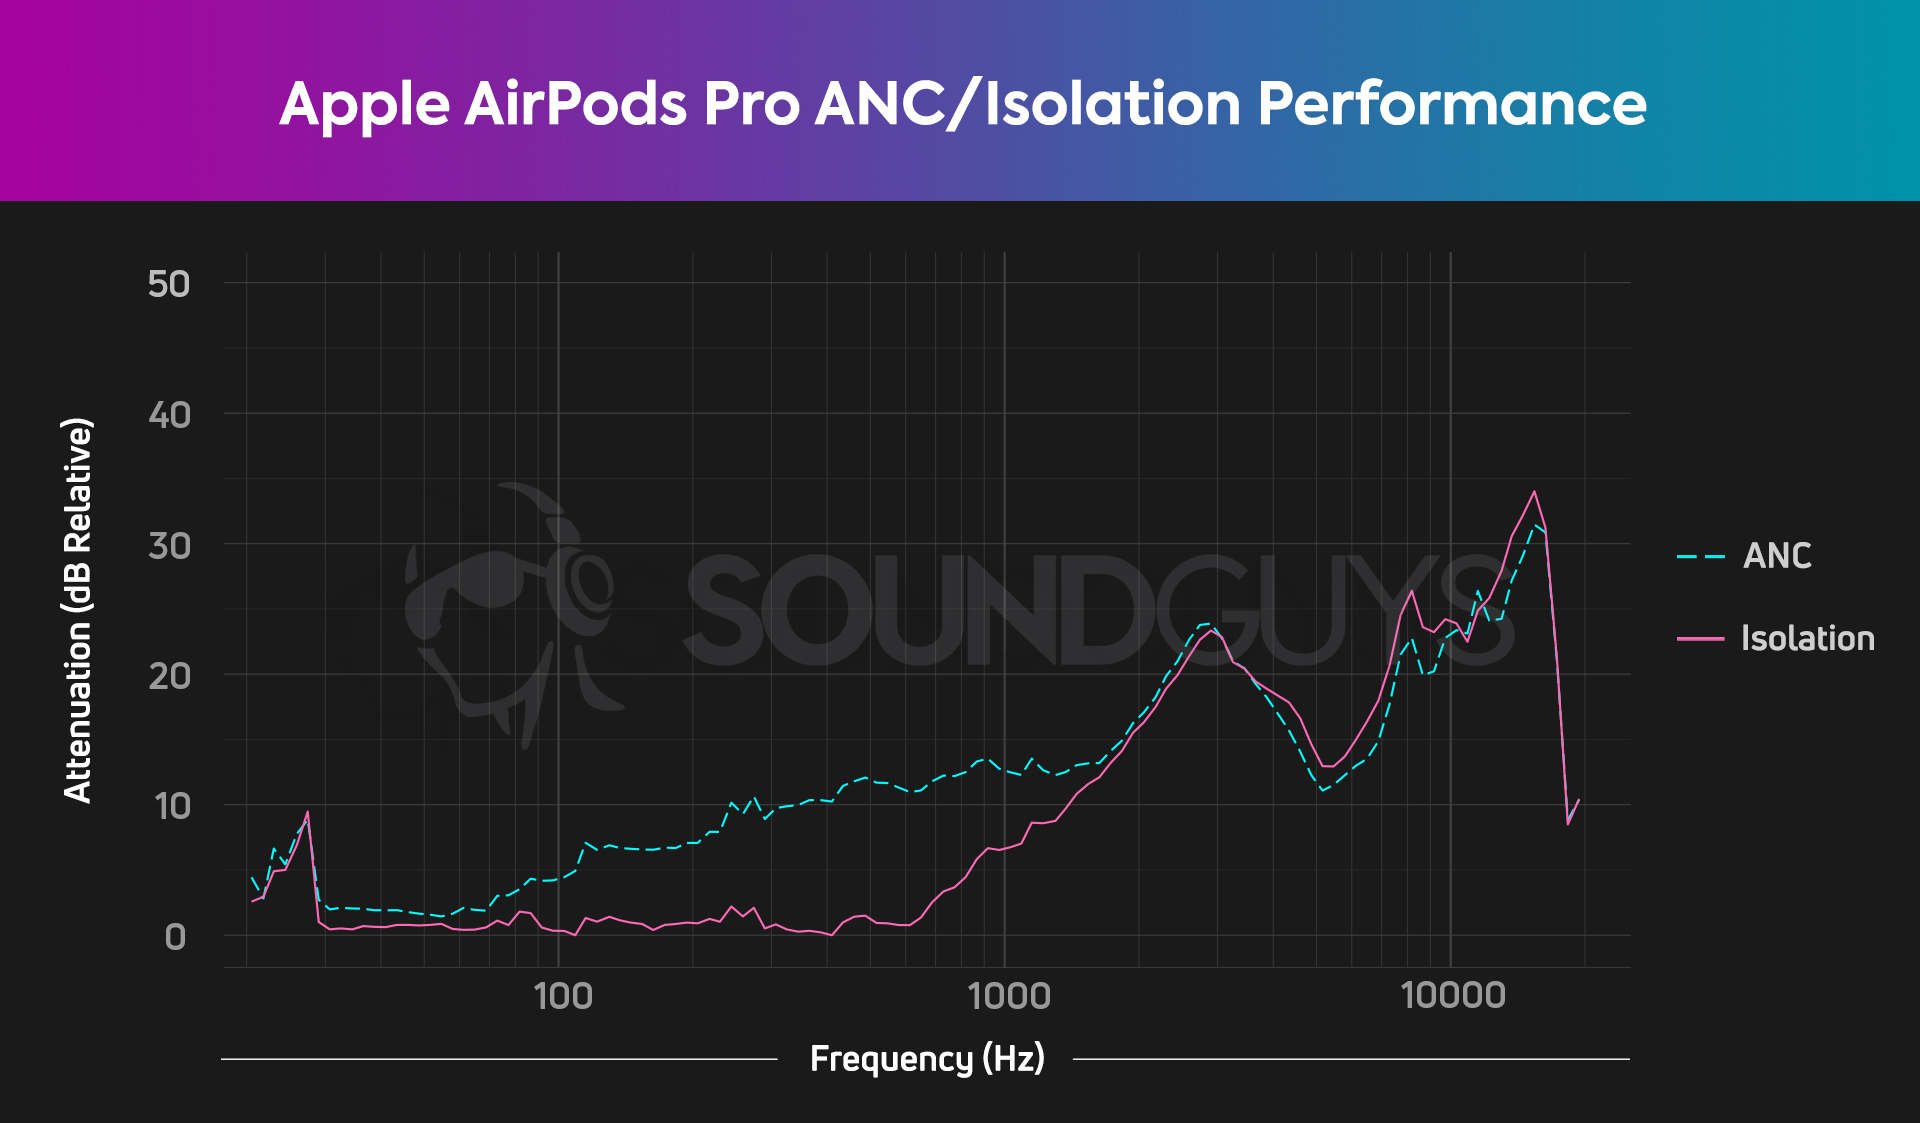 This shows the SoundGuys ANC and isolation chart for the Apple AirPods Pro.